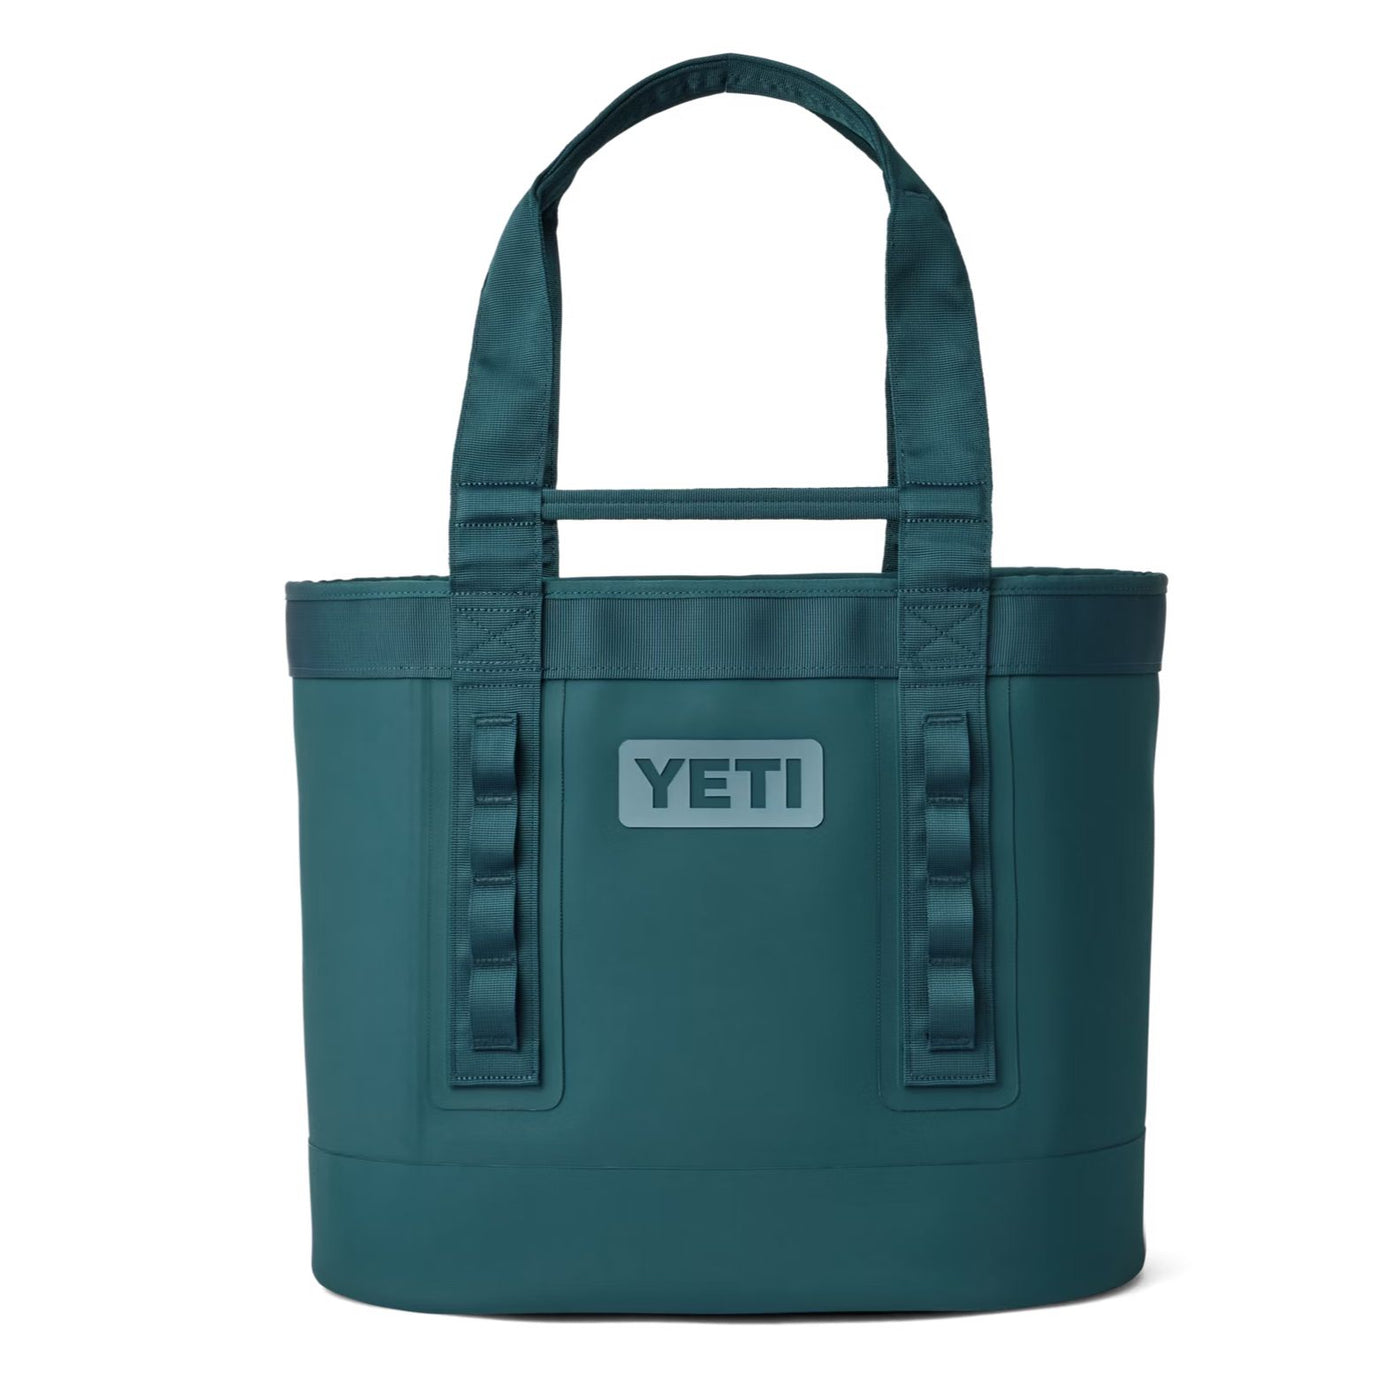 Yeti Camino CarryAll 35-Hunting/Outdoors-AGAVE TEAL-Kevin's Fine Outdoor Gear & Apparel